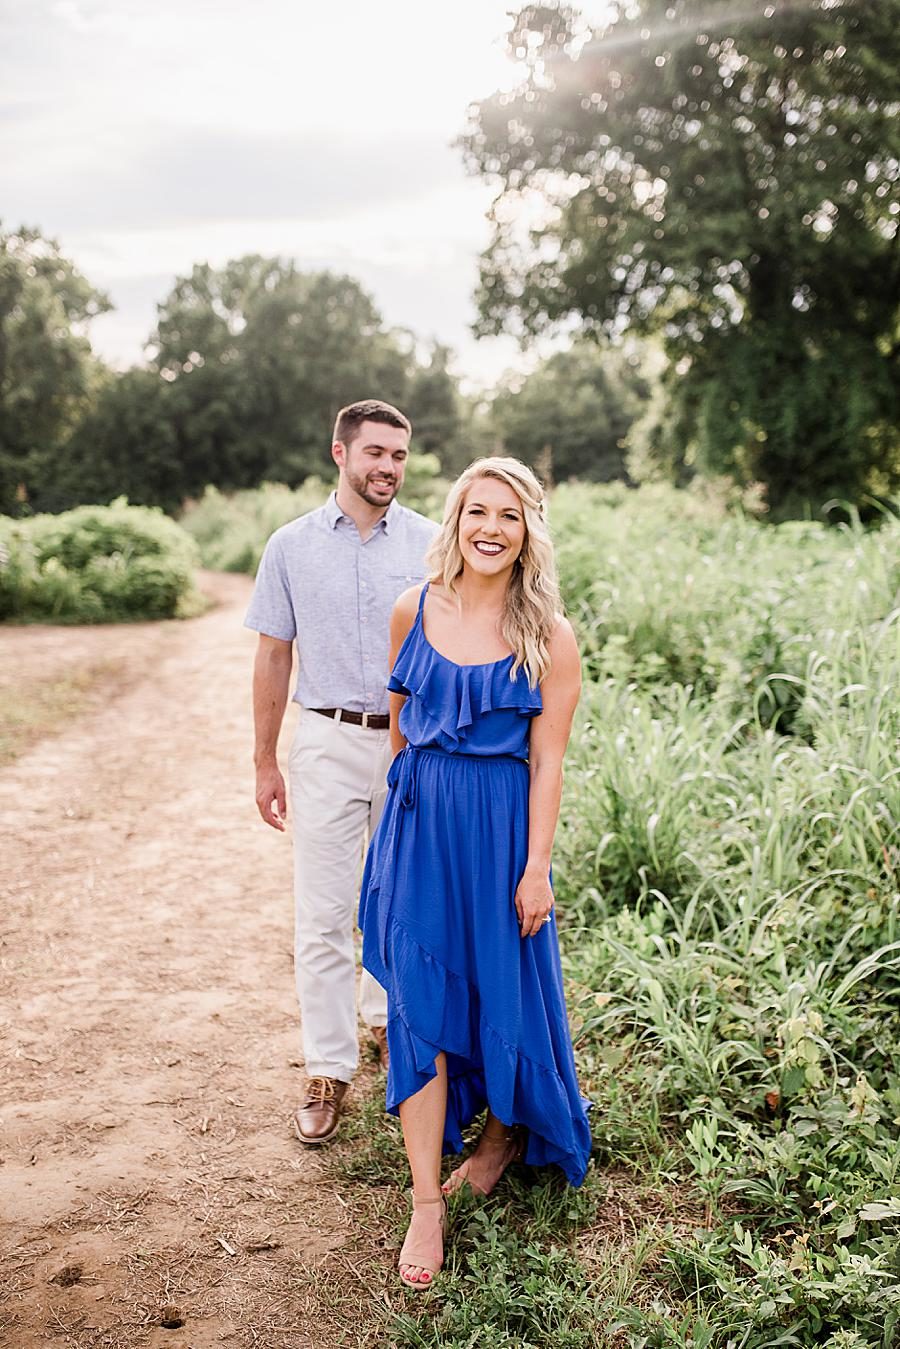 Holding hands at this Forks of the River engagement by Knoxville Wedding Photographer, Amanda May Photos.